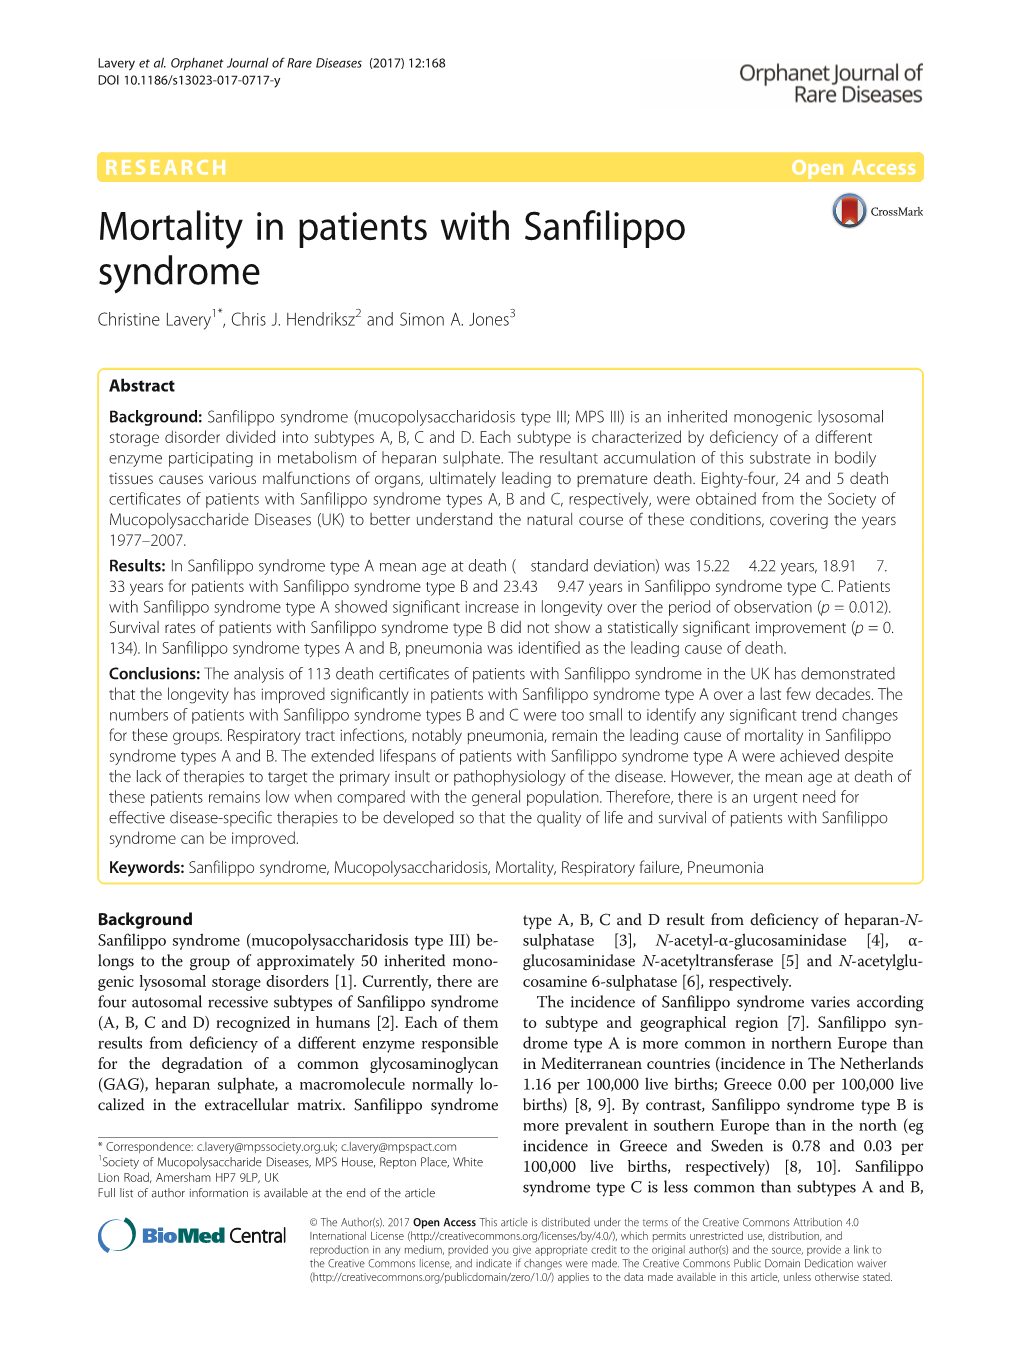 Mortality in Patients with Sanfilippo Syndrome Christine Lavery1*, Chris J